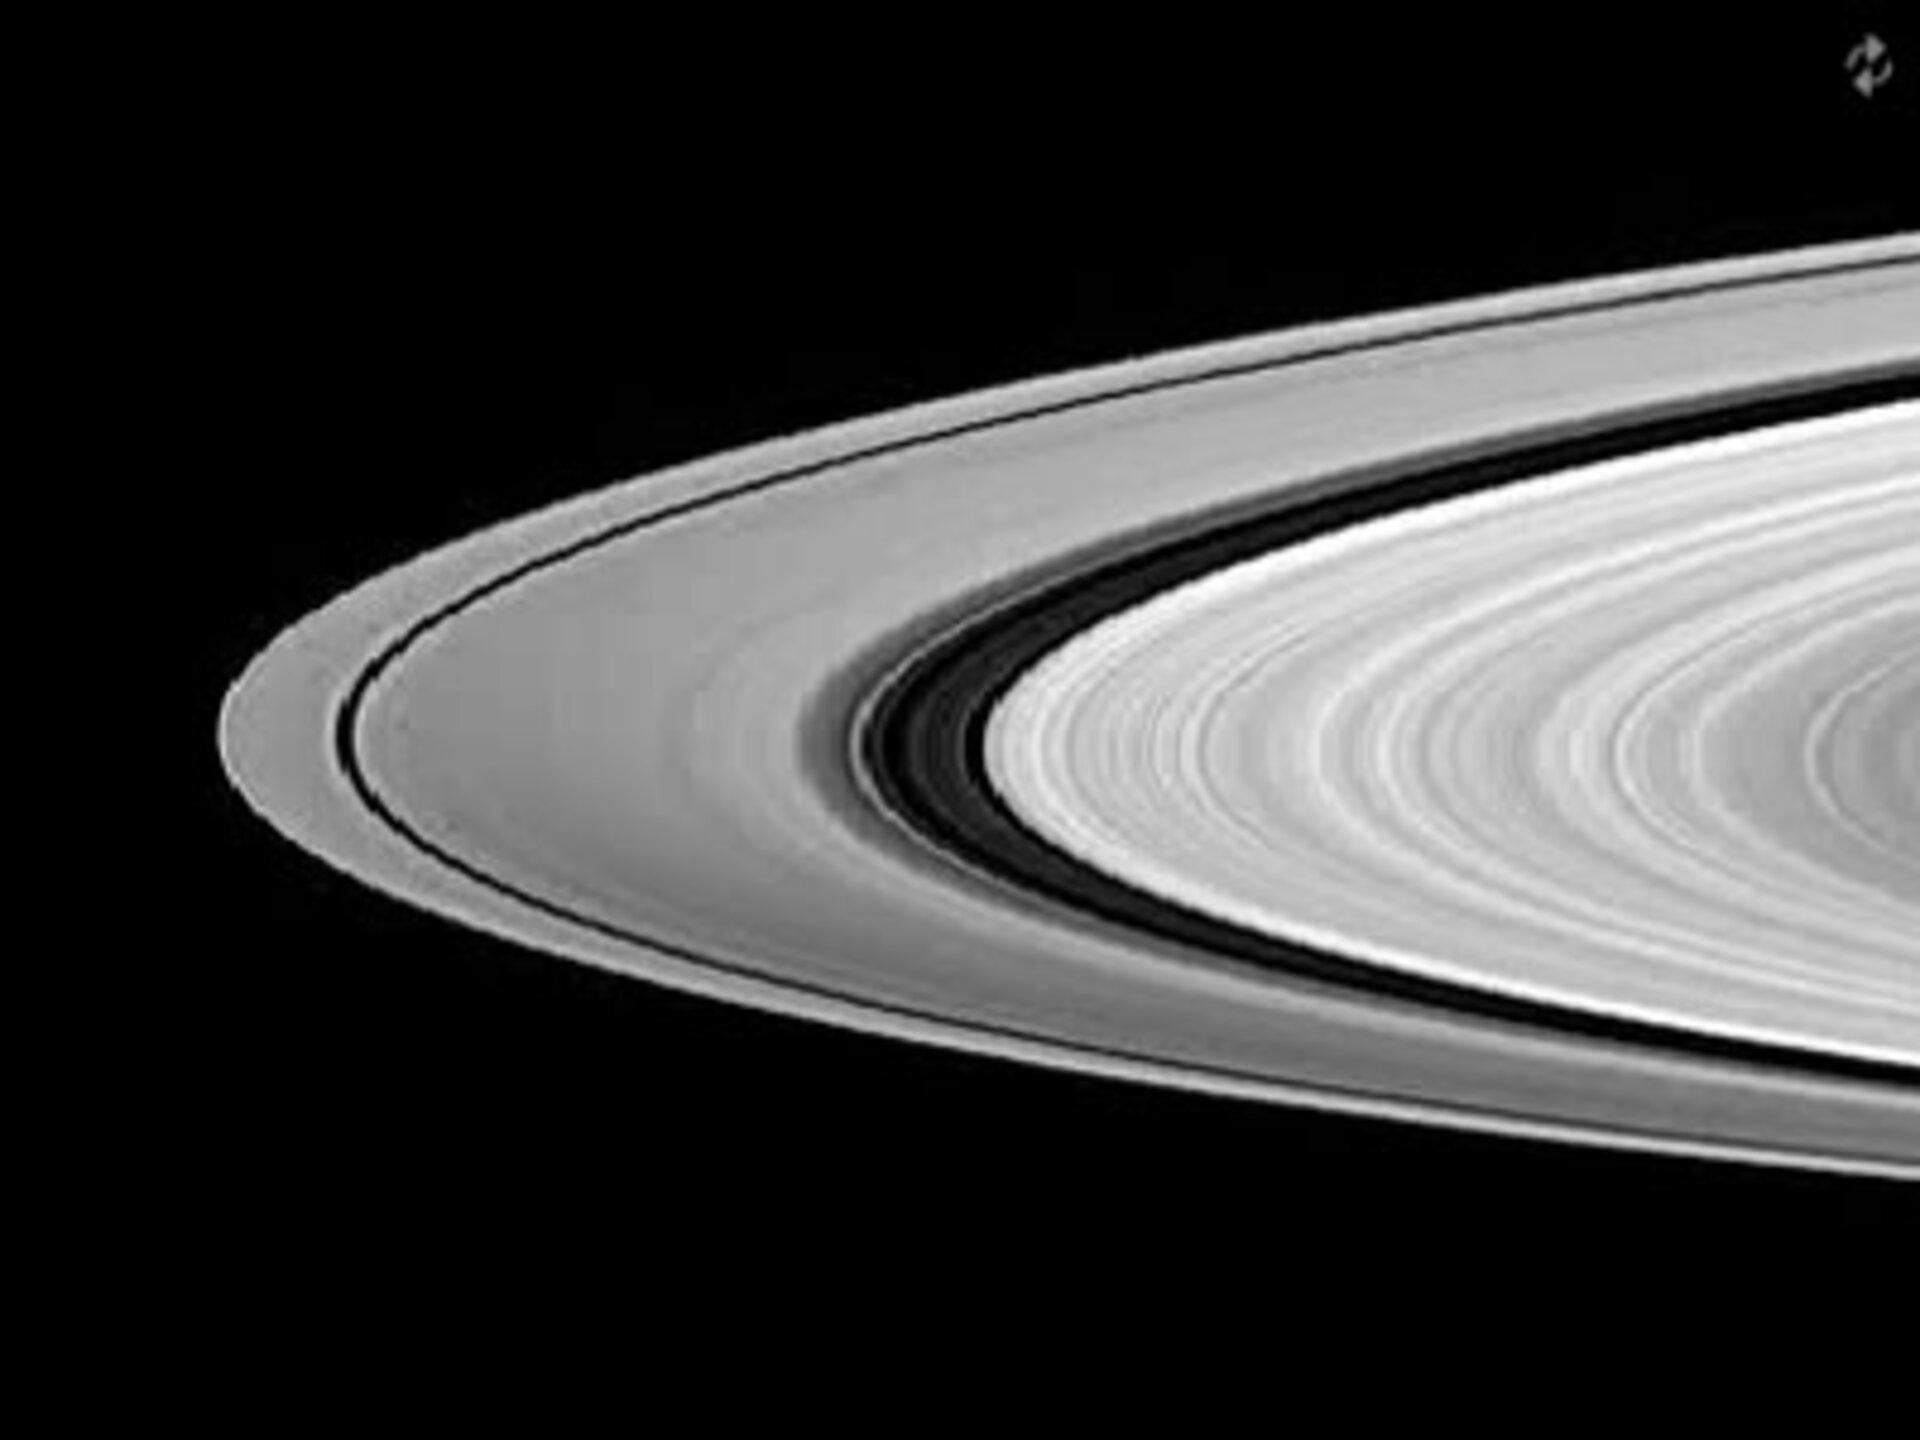 The Great Crossing of Saturn's rings